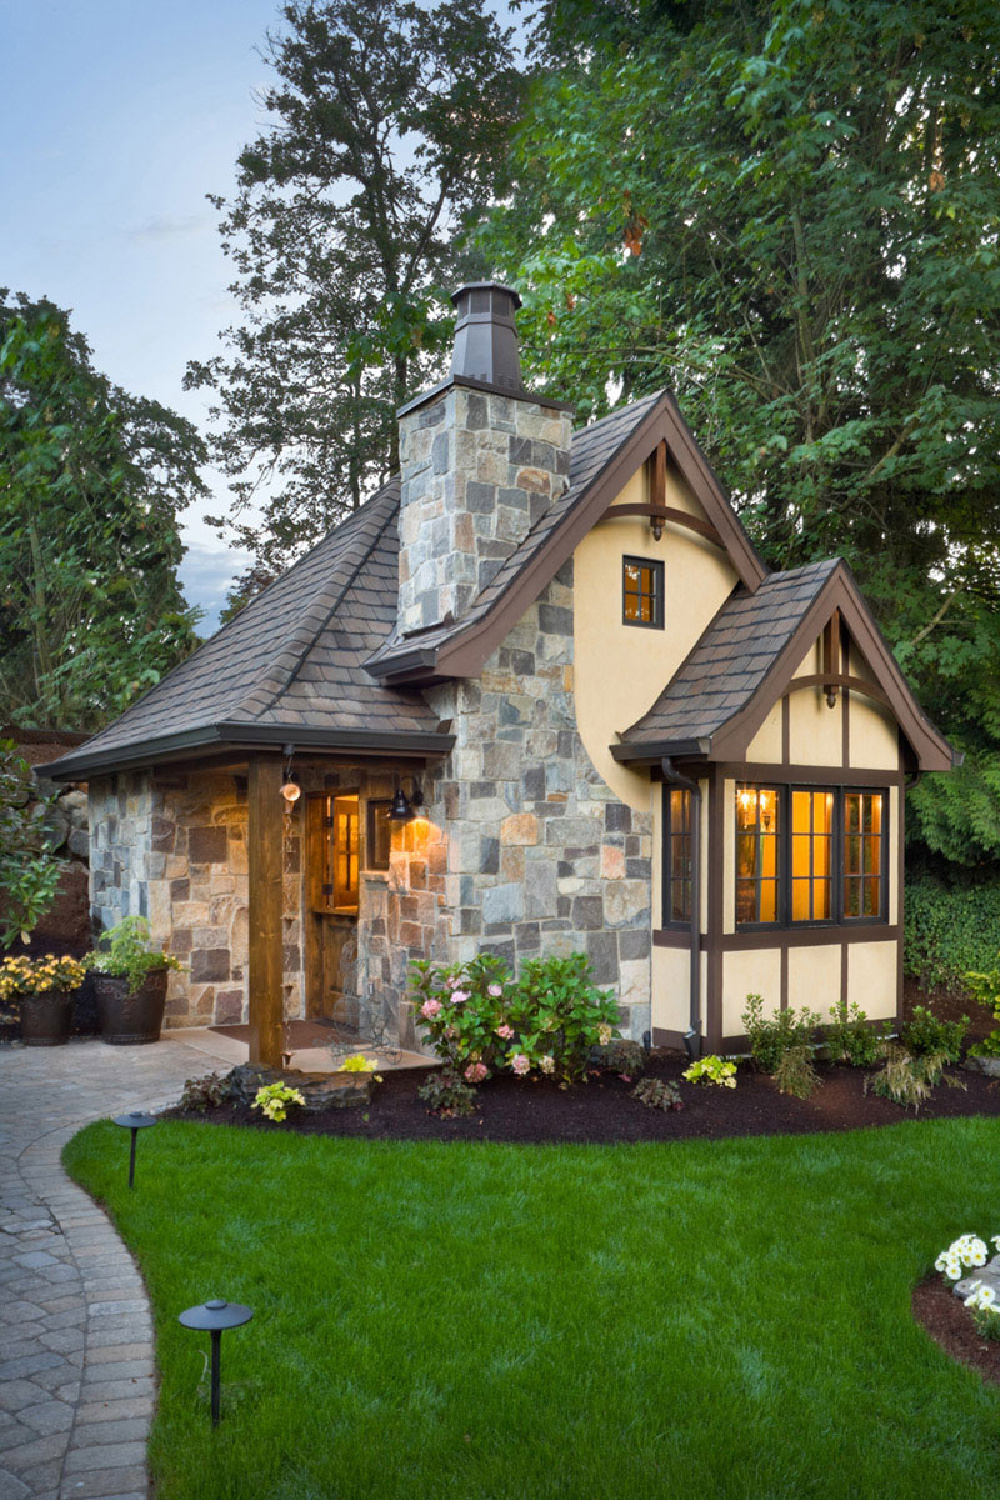 300 square foot tiny house cottage (Clarendon model) with Dutch door, vaulted ceiling, stone chimney and Tudor style details - @thehousedesigners. #tinyhousedesign #tinycottages